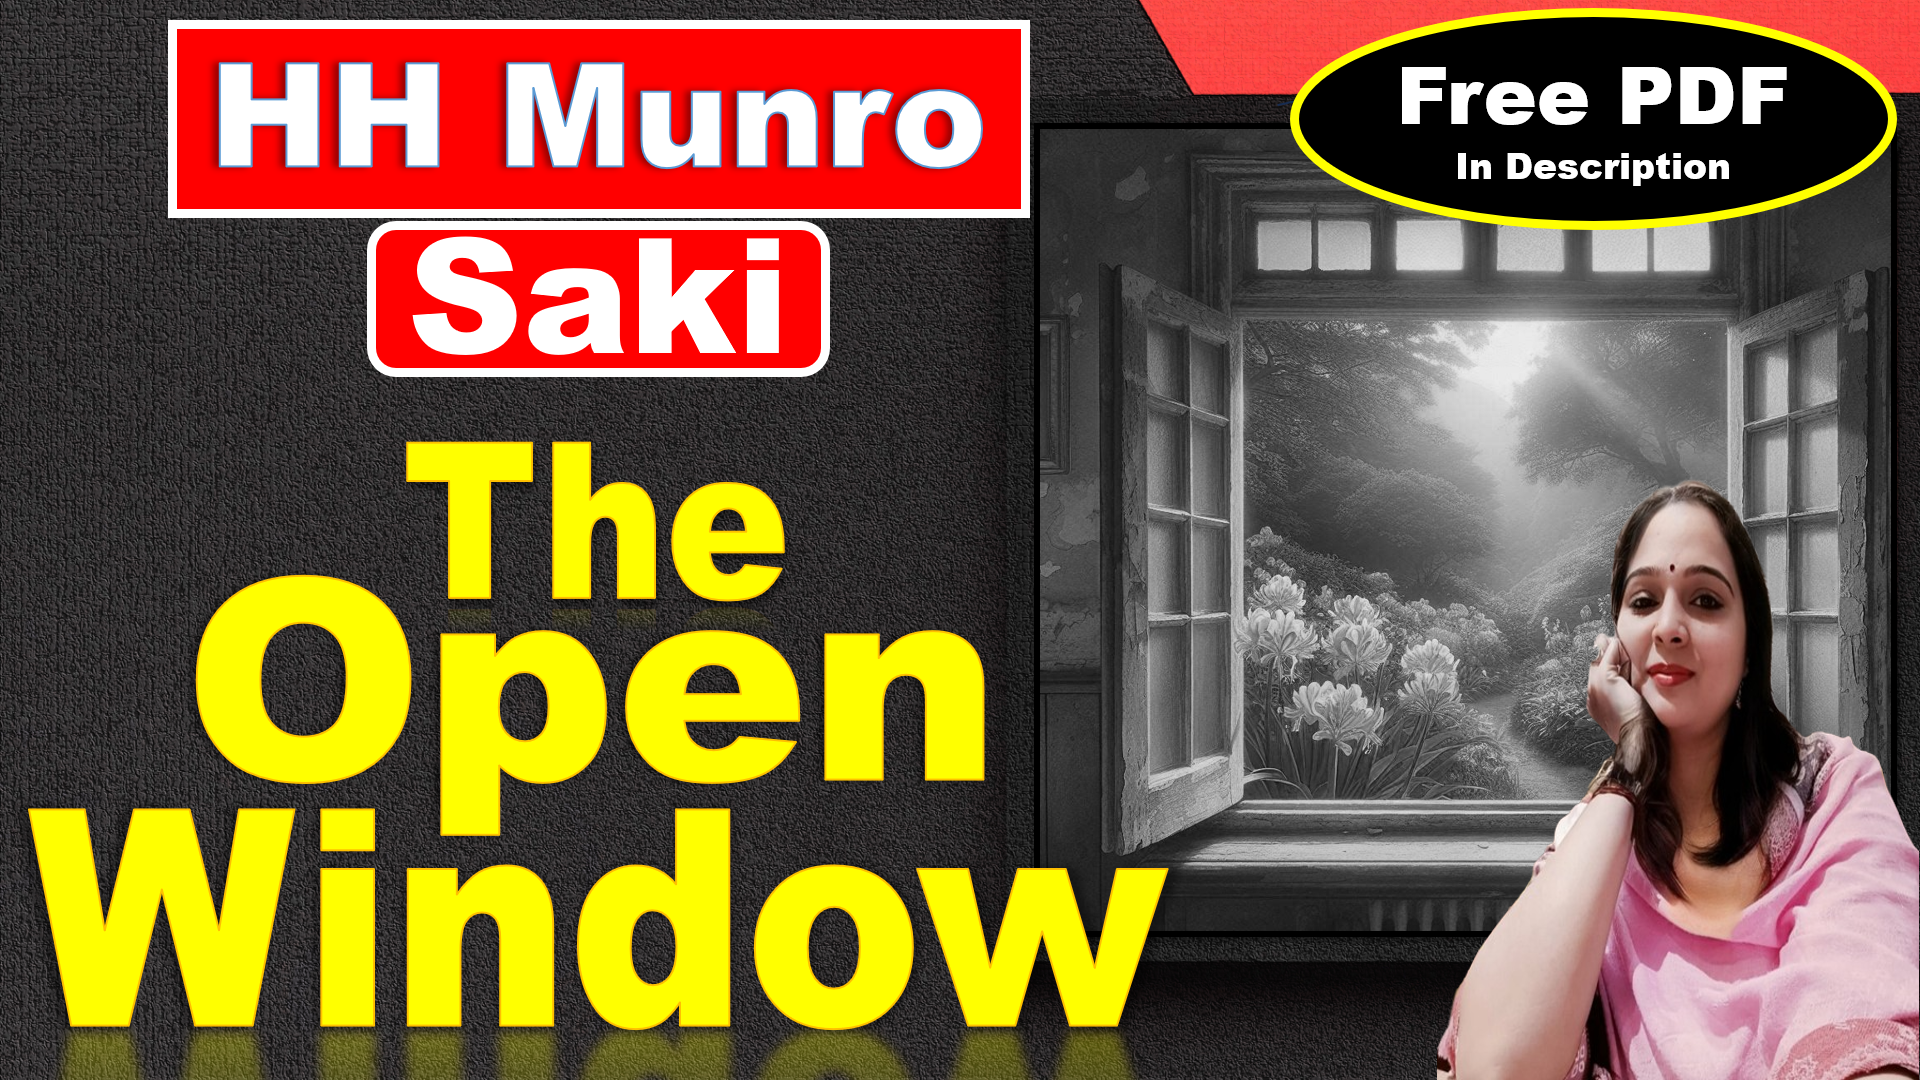 You are currently viewing The Open Window by HH Munro | The Open Window by Saki | The Open Window – Easy Literary Lessons